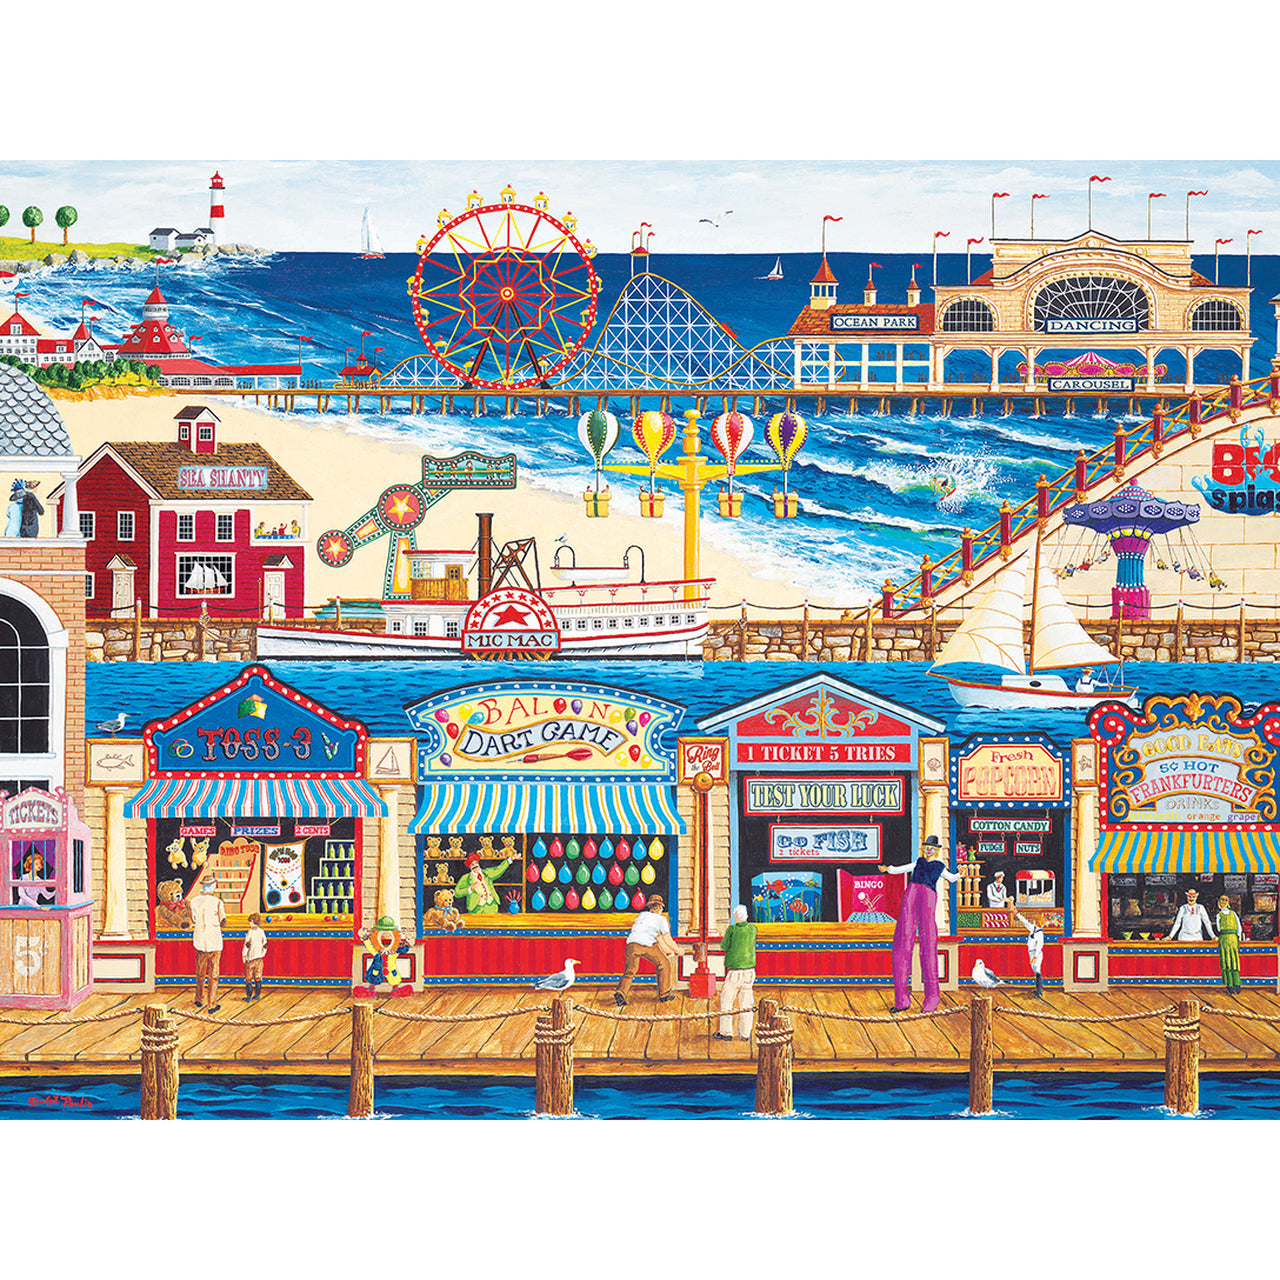 Family Hour Ocean Park Large 400 Piece EZGrip Jigsaw Puzzle by Masterpieces